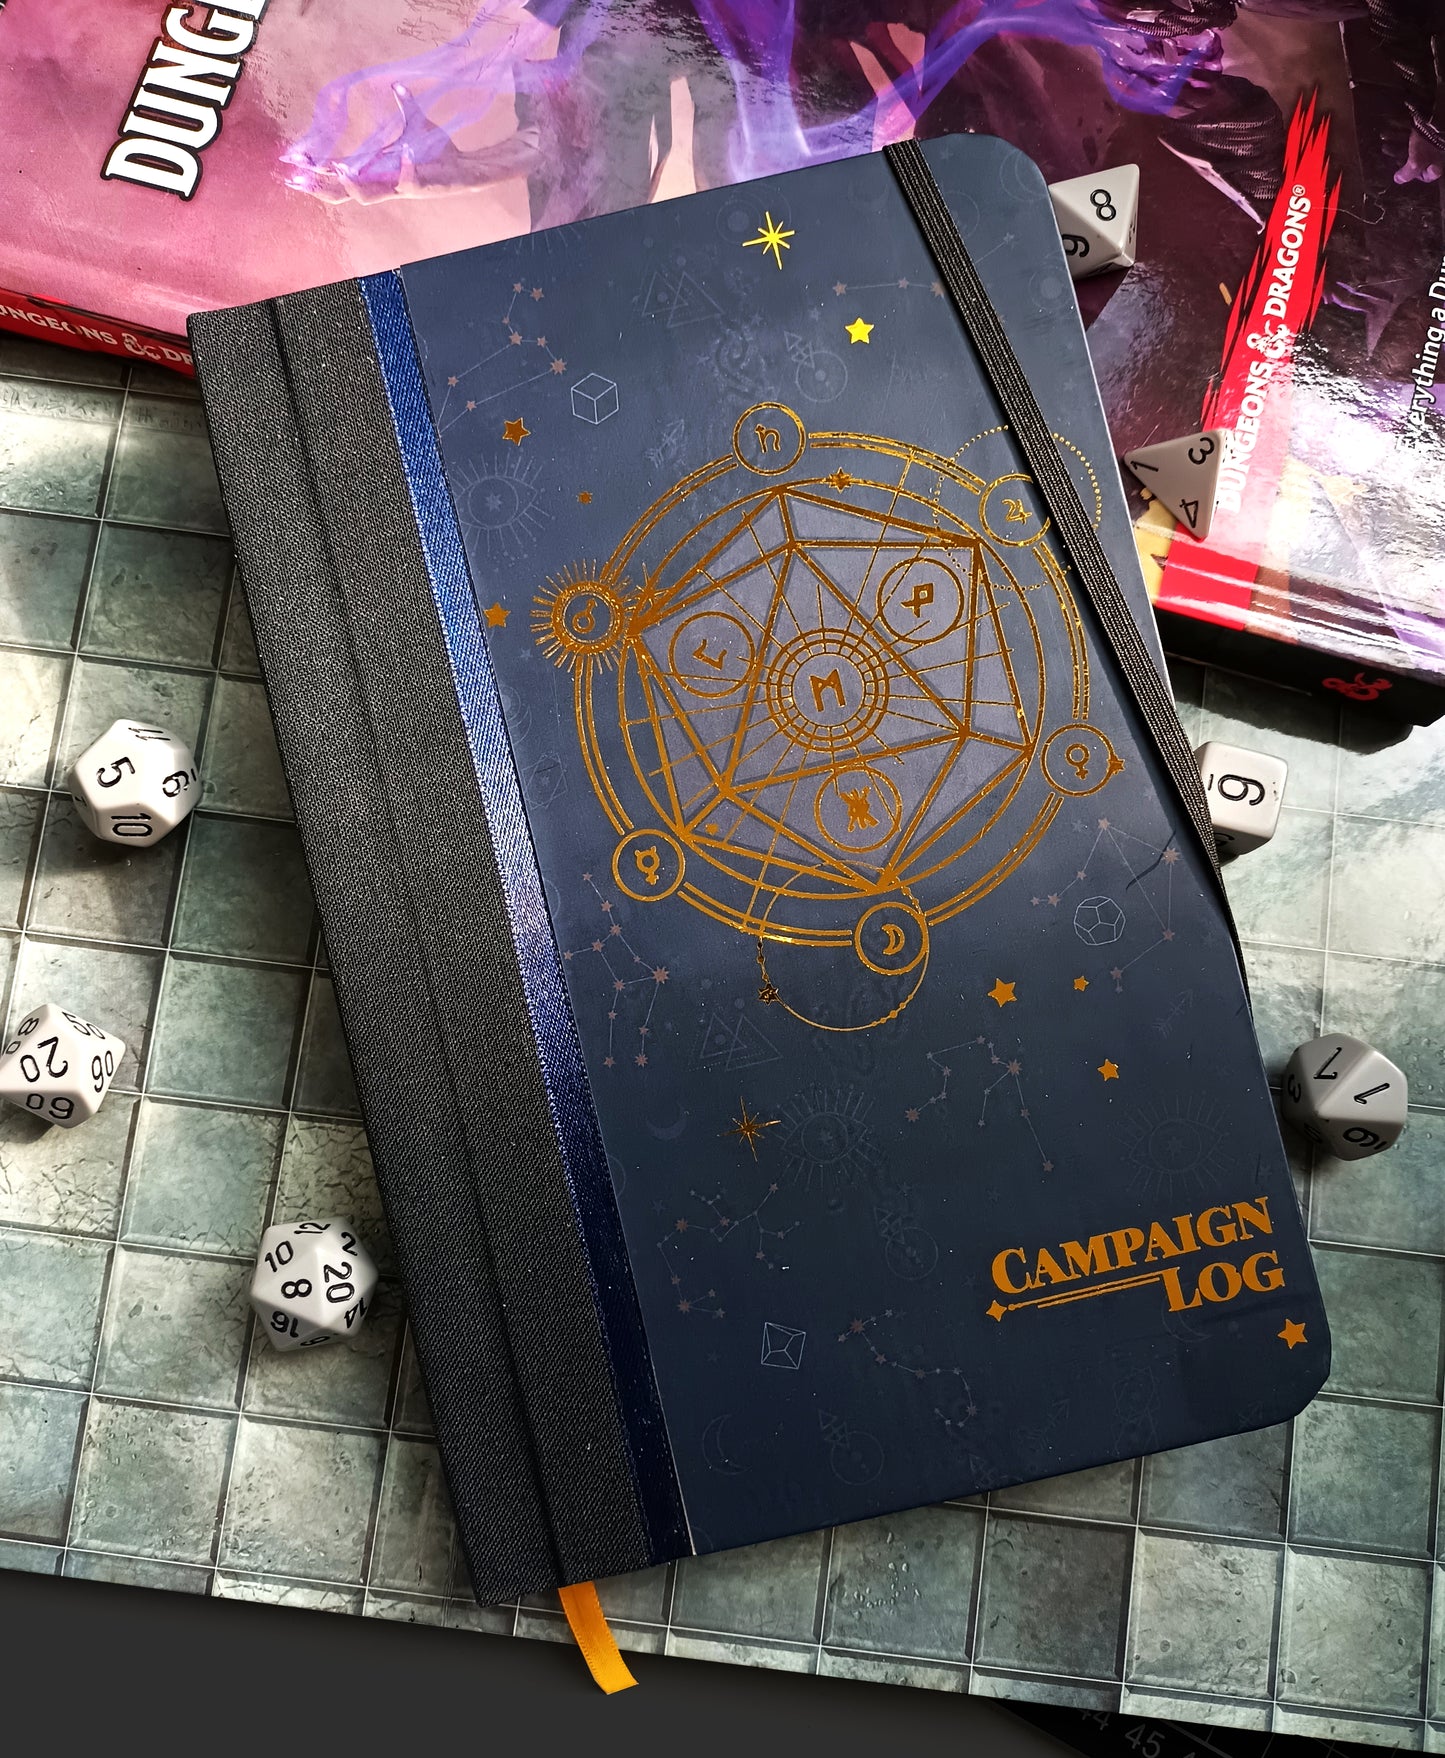 The Mage's journal